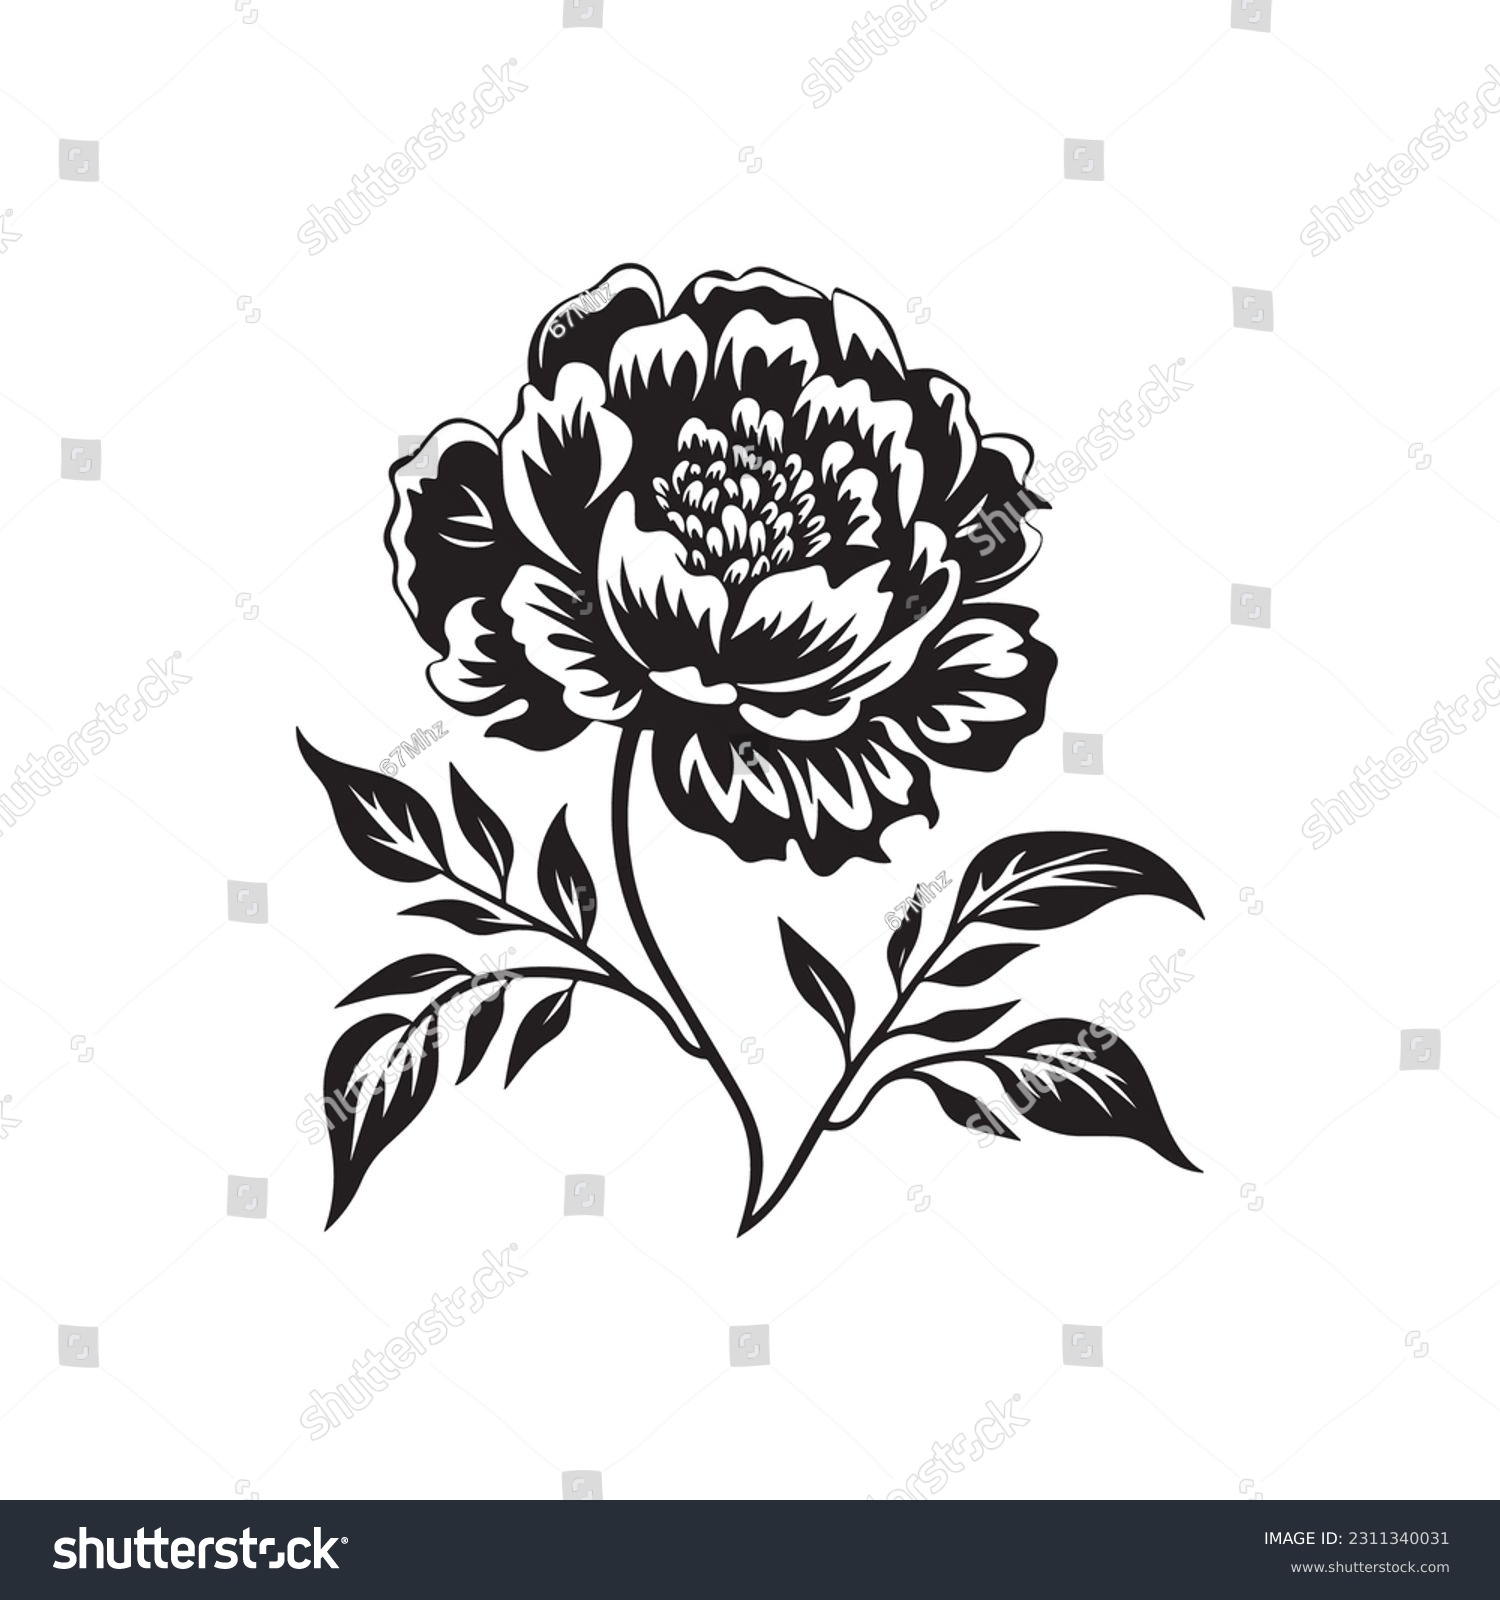 SVG of Peony flower , black sillouette, lines thick and connected. Park and garden flowers svg